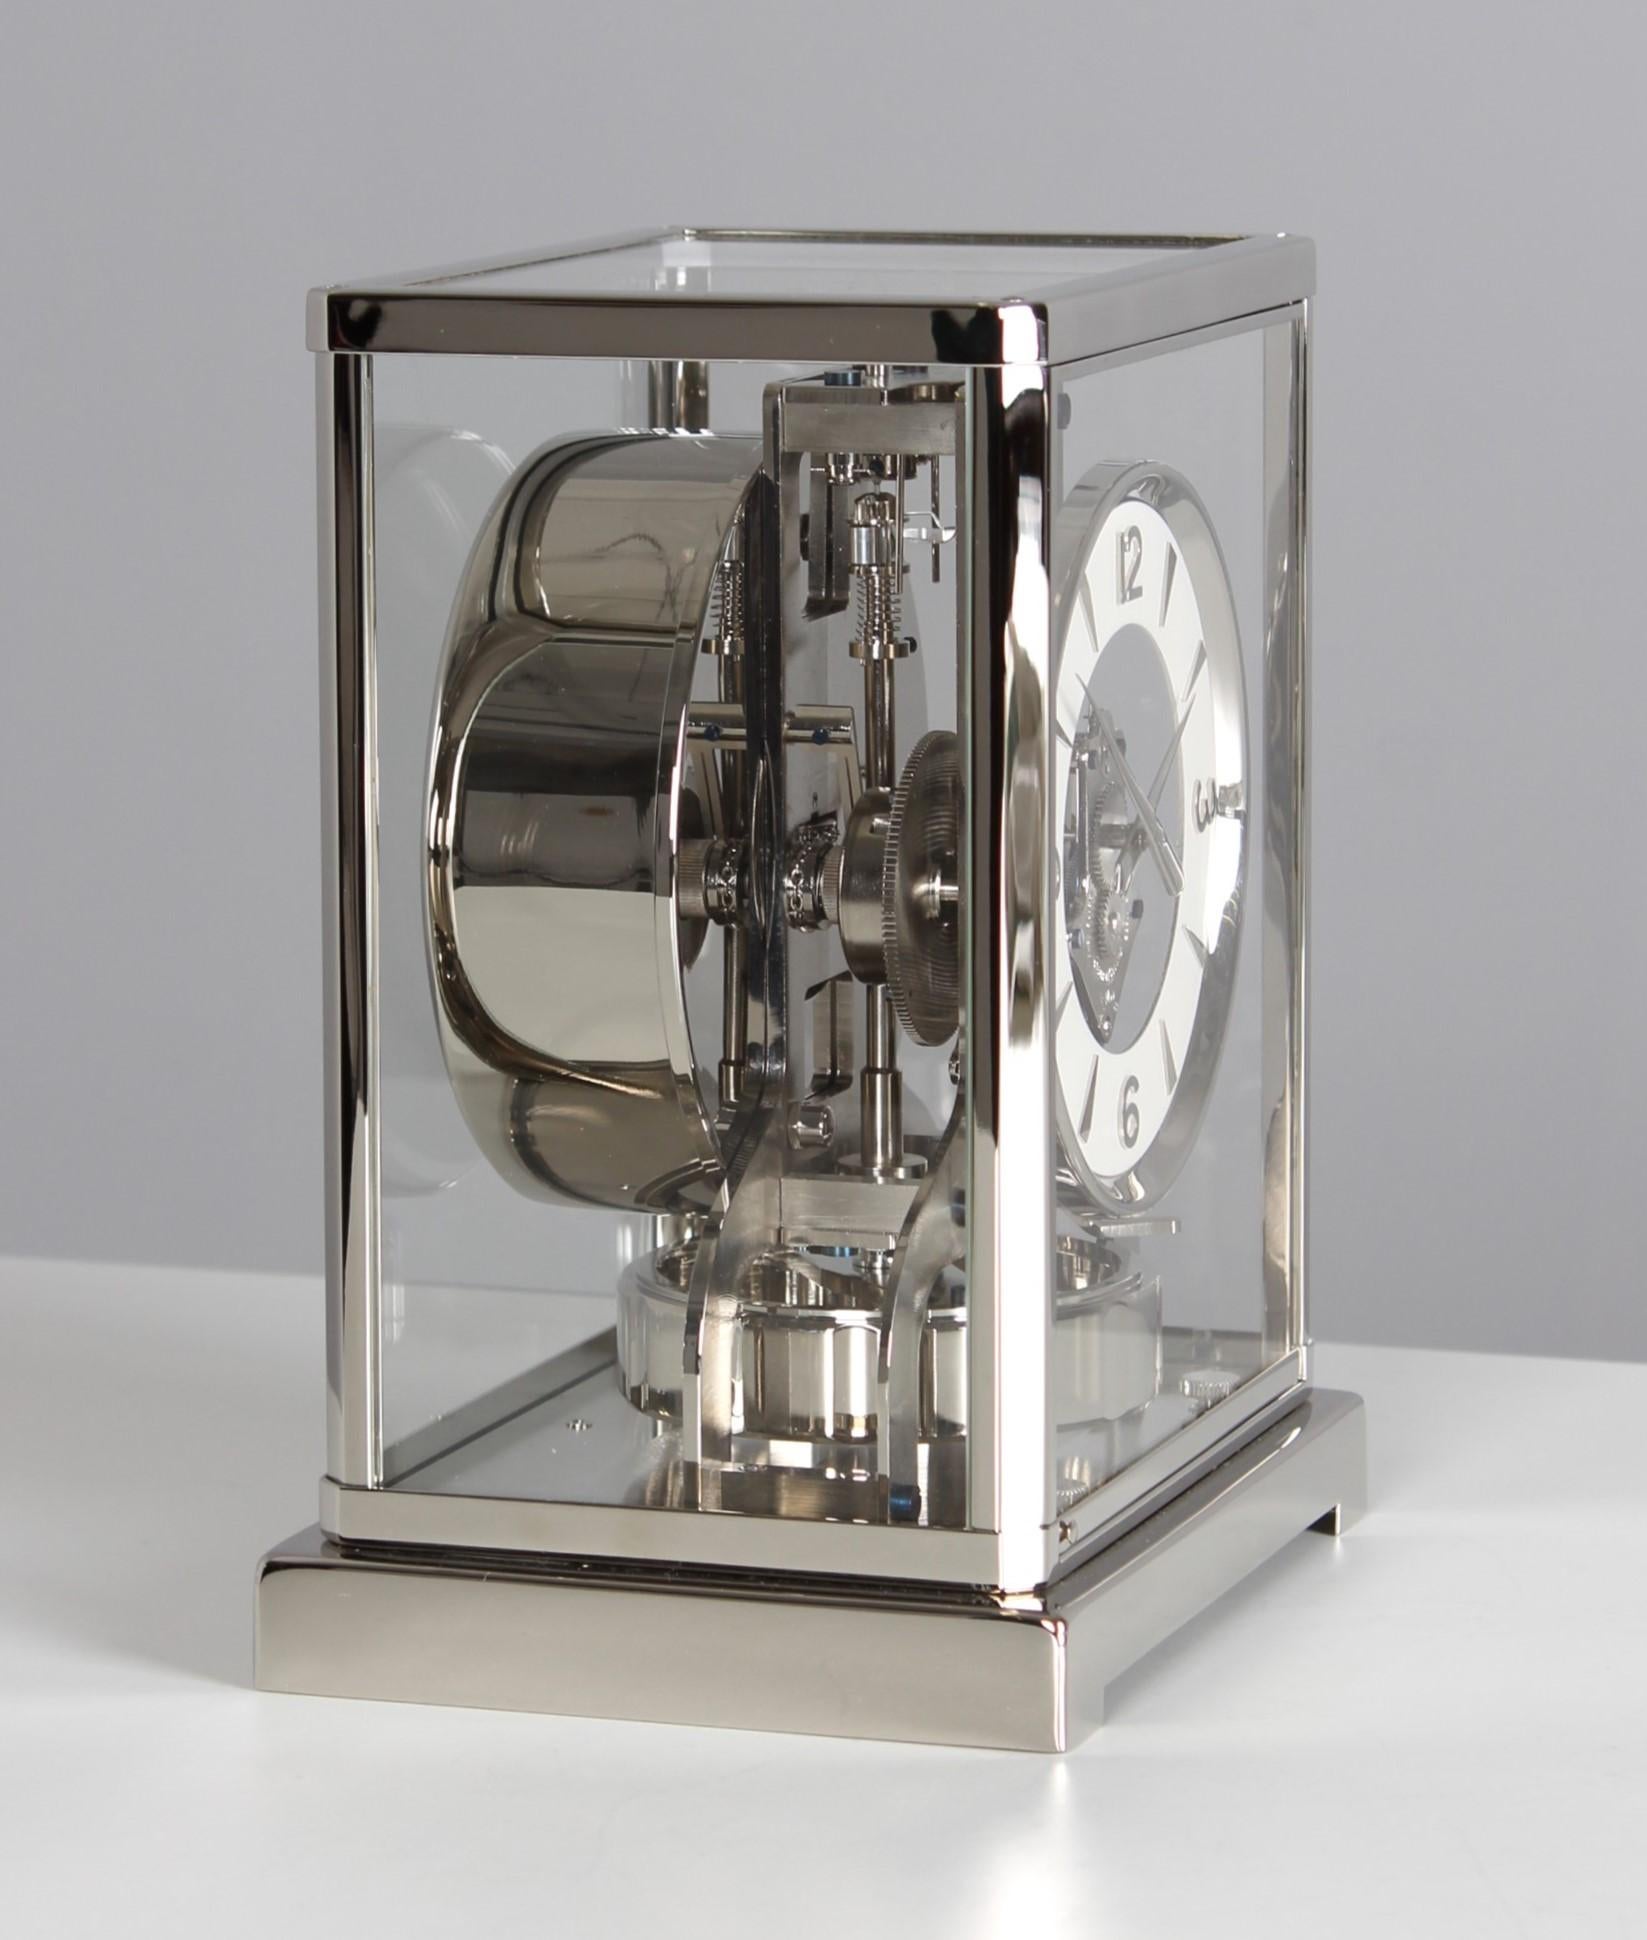 Jaeger LeCoultre, Silver Atmos Clock from 1955, Revised and New Nickel-Plated 1